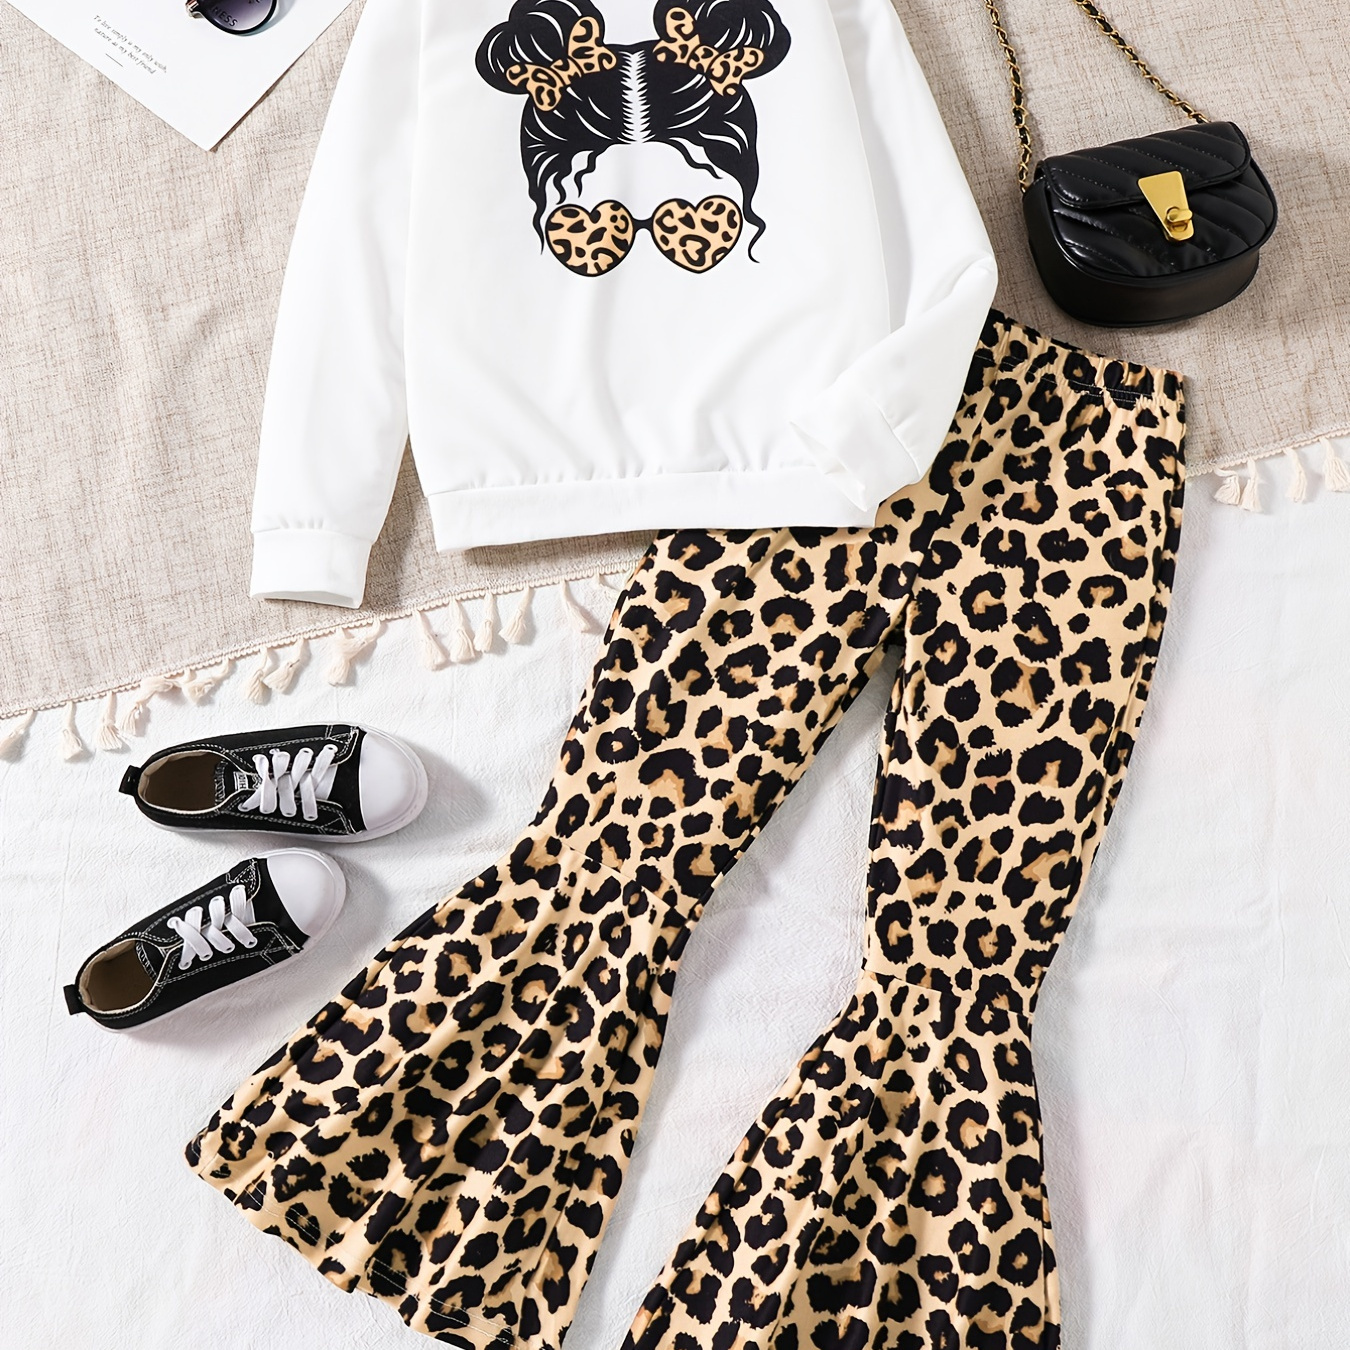 

Girl's Trendy Outfit 2pcs, Sweatshirt & Leopard Pattern Flared Pants Set, Sunglasses Girl Print Kid's Clothes For Spring Fall